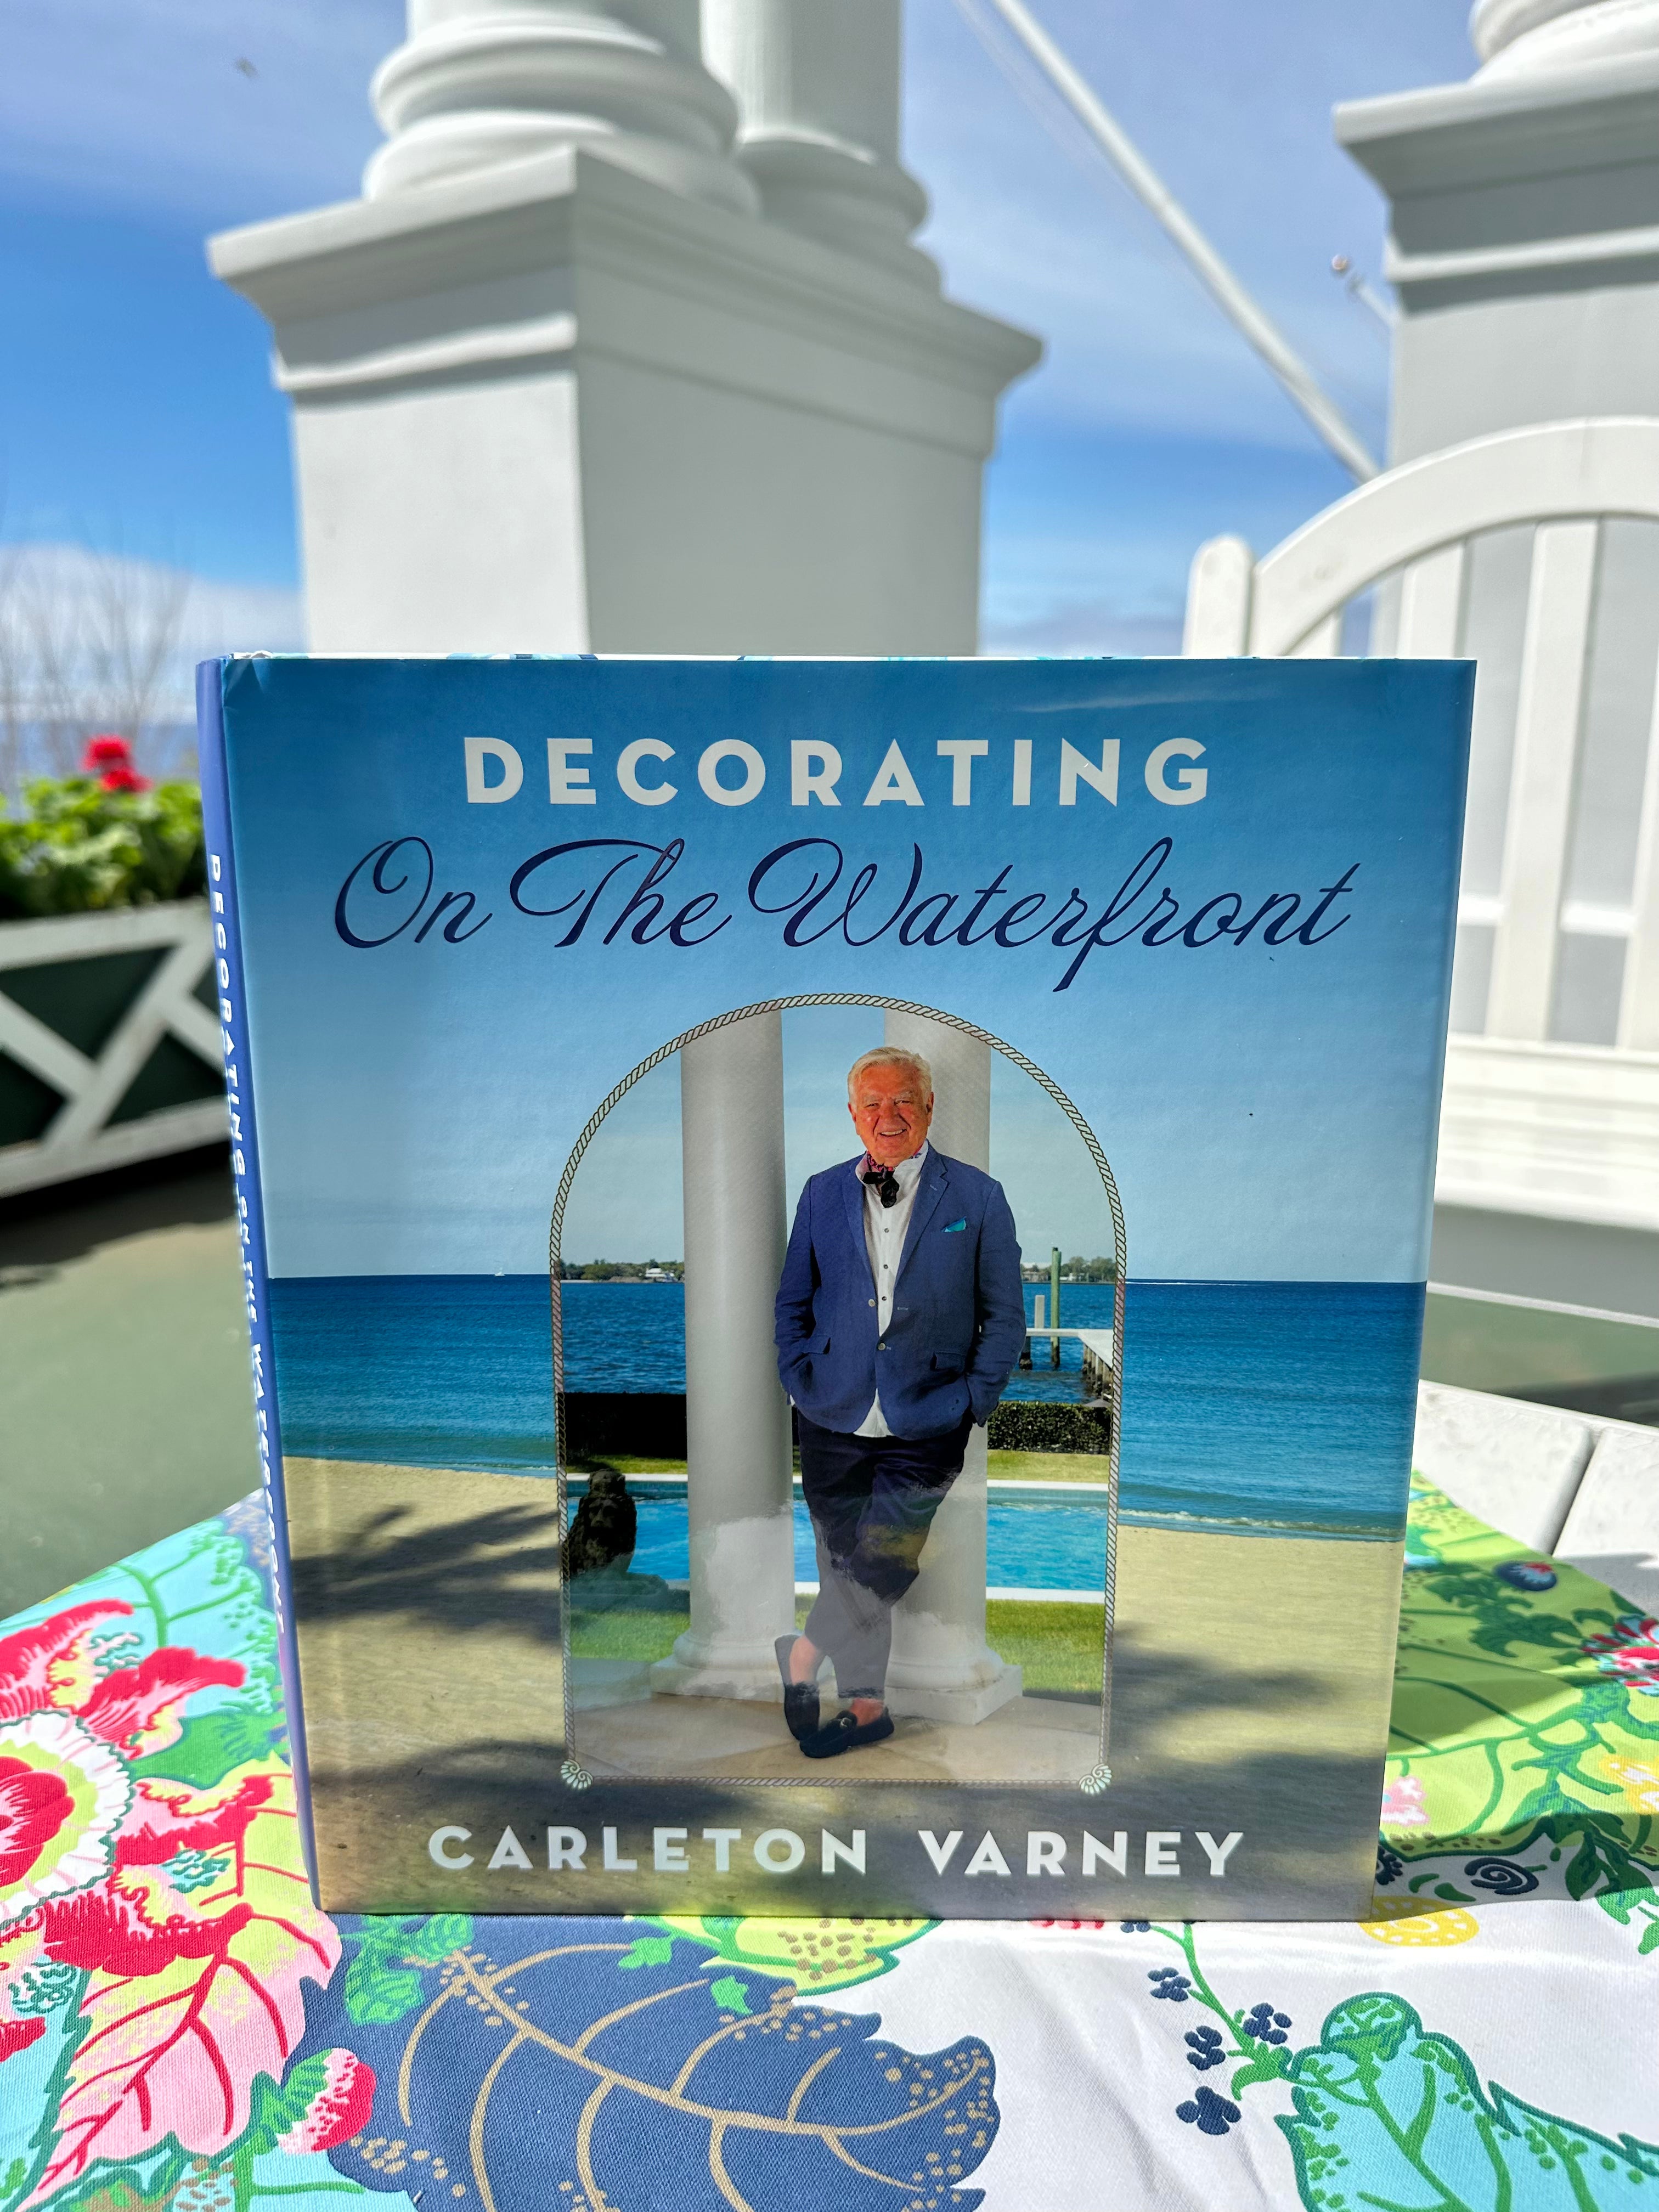 Decorating On The Waterfront by Carleton Varney